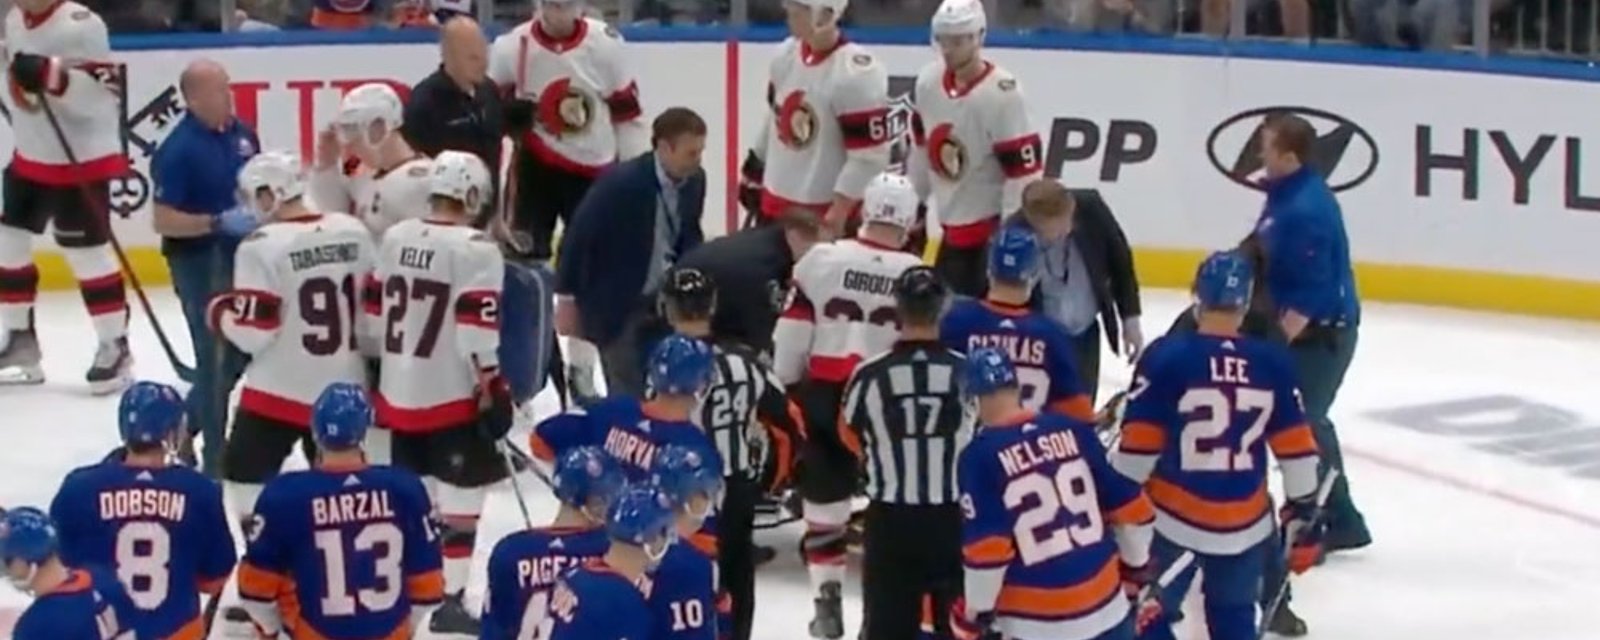 Brannstrom stretchered off the ice after scary hit from Cal Clutterbuck